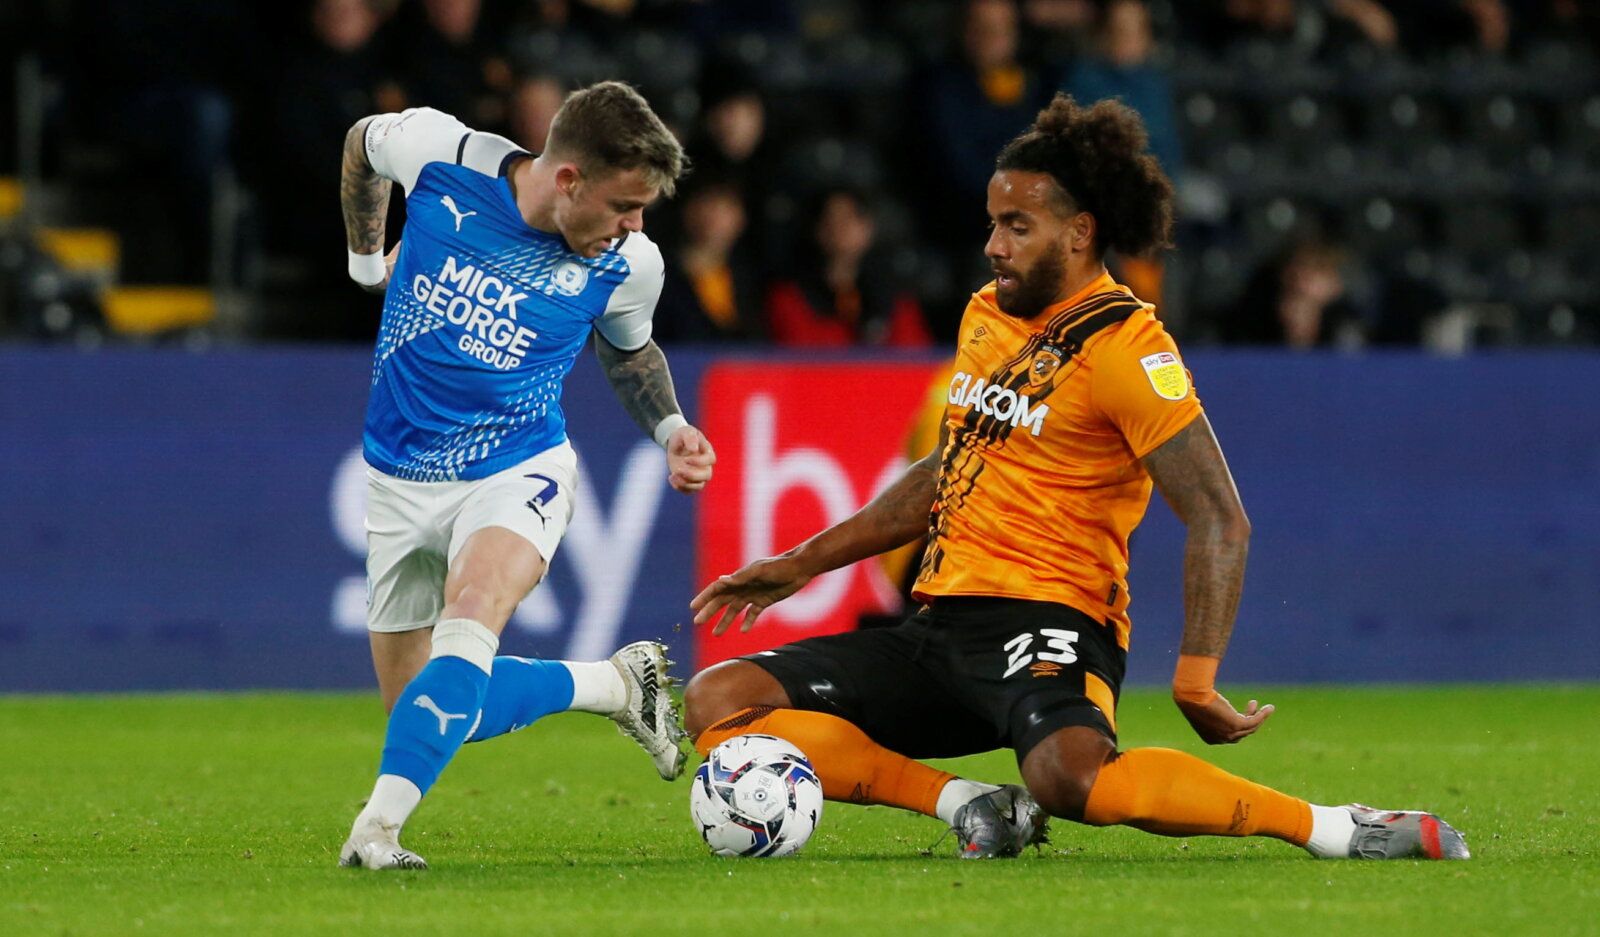 Soccer Football - Championship - Hull City v Peterborough United - KCOM Stadium, Hull, Britain - October 20, 2021 Peterborough United's Sammie Szmodics (L) in action with Hull City's Tom Huddlestone   Action Images/Craig Brough  EDITORIAL USE ONLY. No use with unauthorized audio, video, data, fixture lists, club/league logos or 